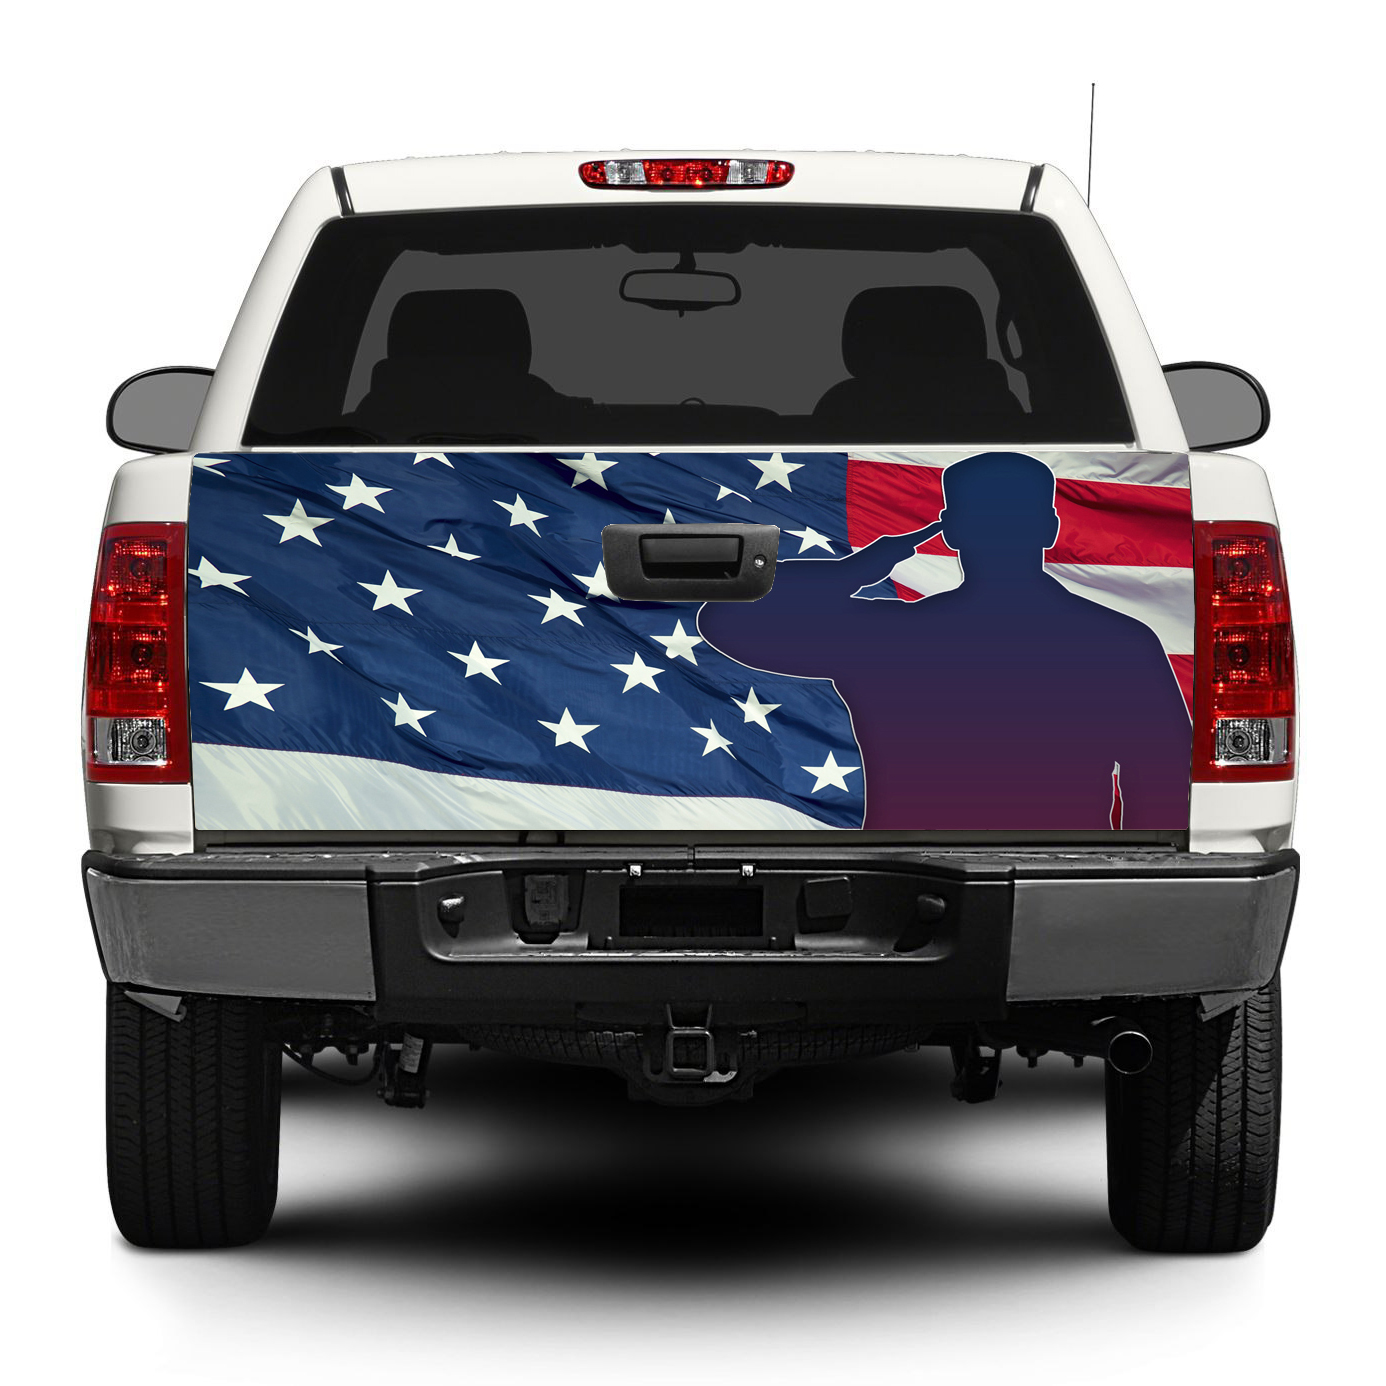 US Marine Corp American Flag Tailgate Wrap Vinyl Graphic Decal Sticker Wrap #231 